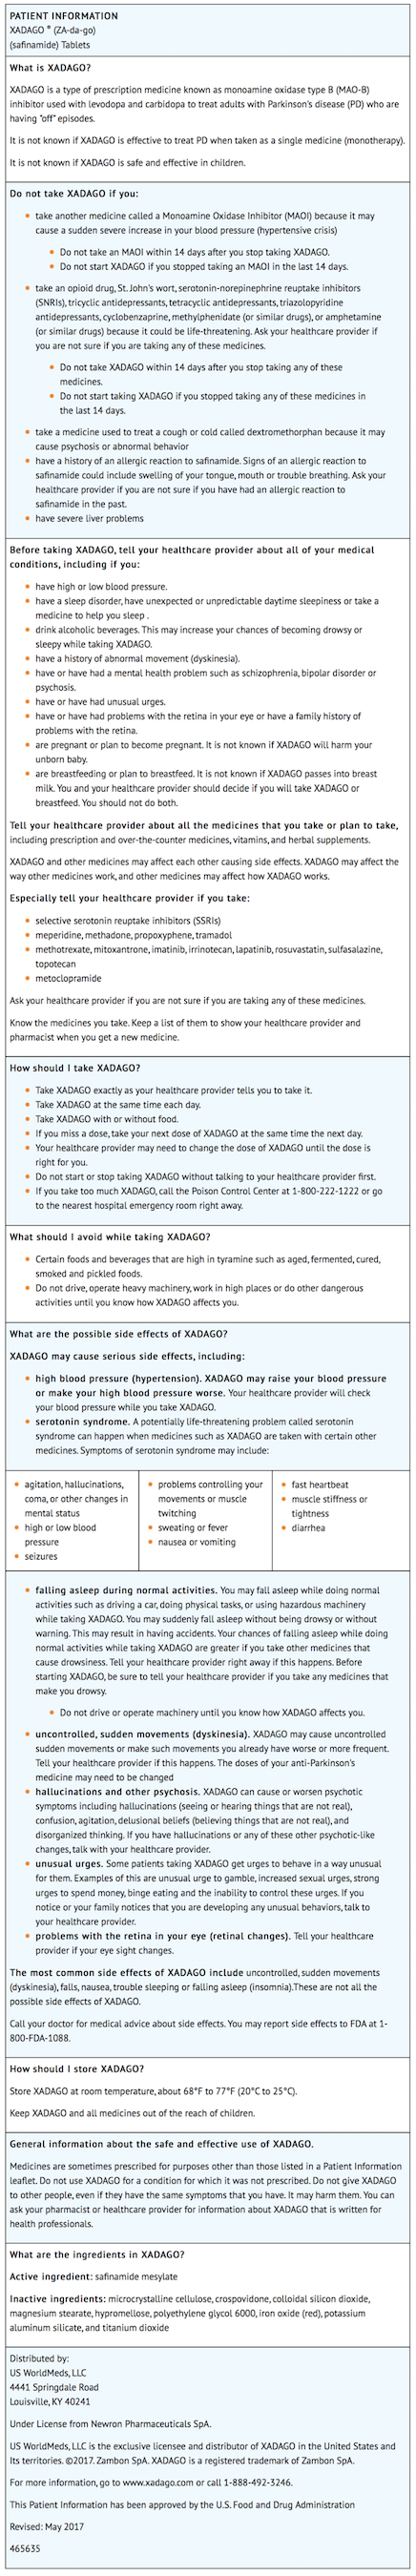 File:Safinamide Patient Counseling Information.png